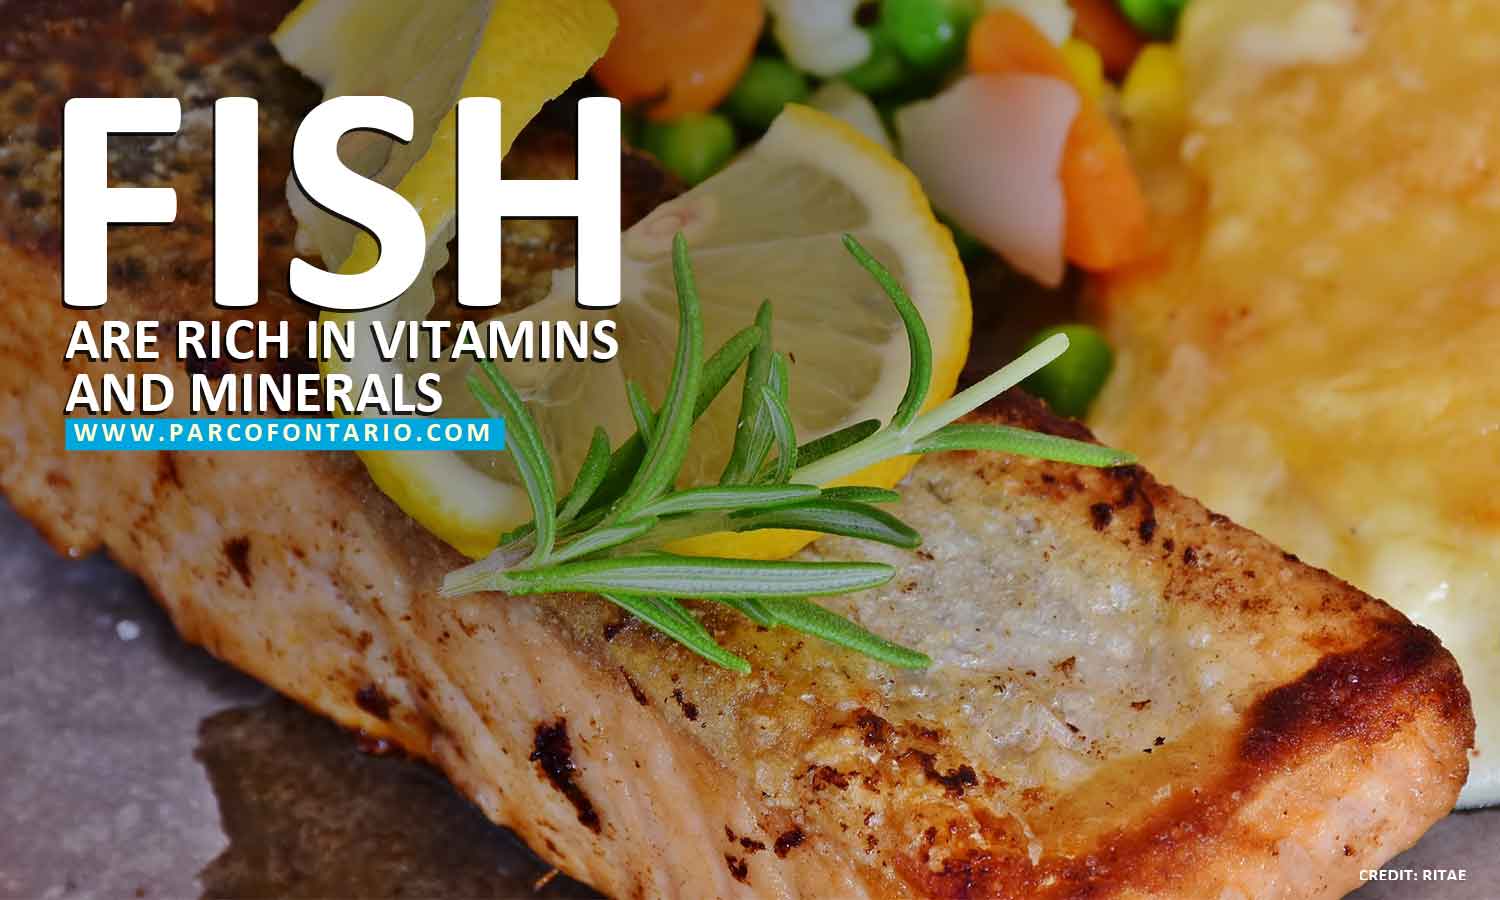 Fish are rich in vitamins and minerals